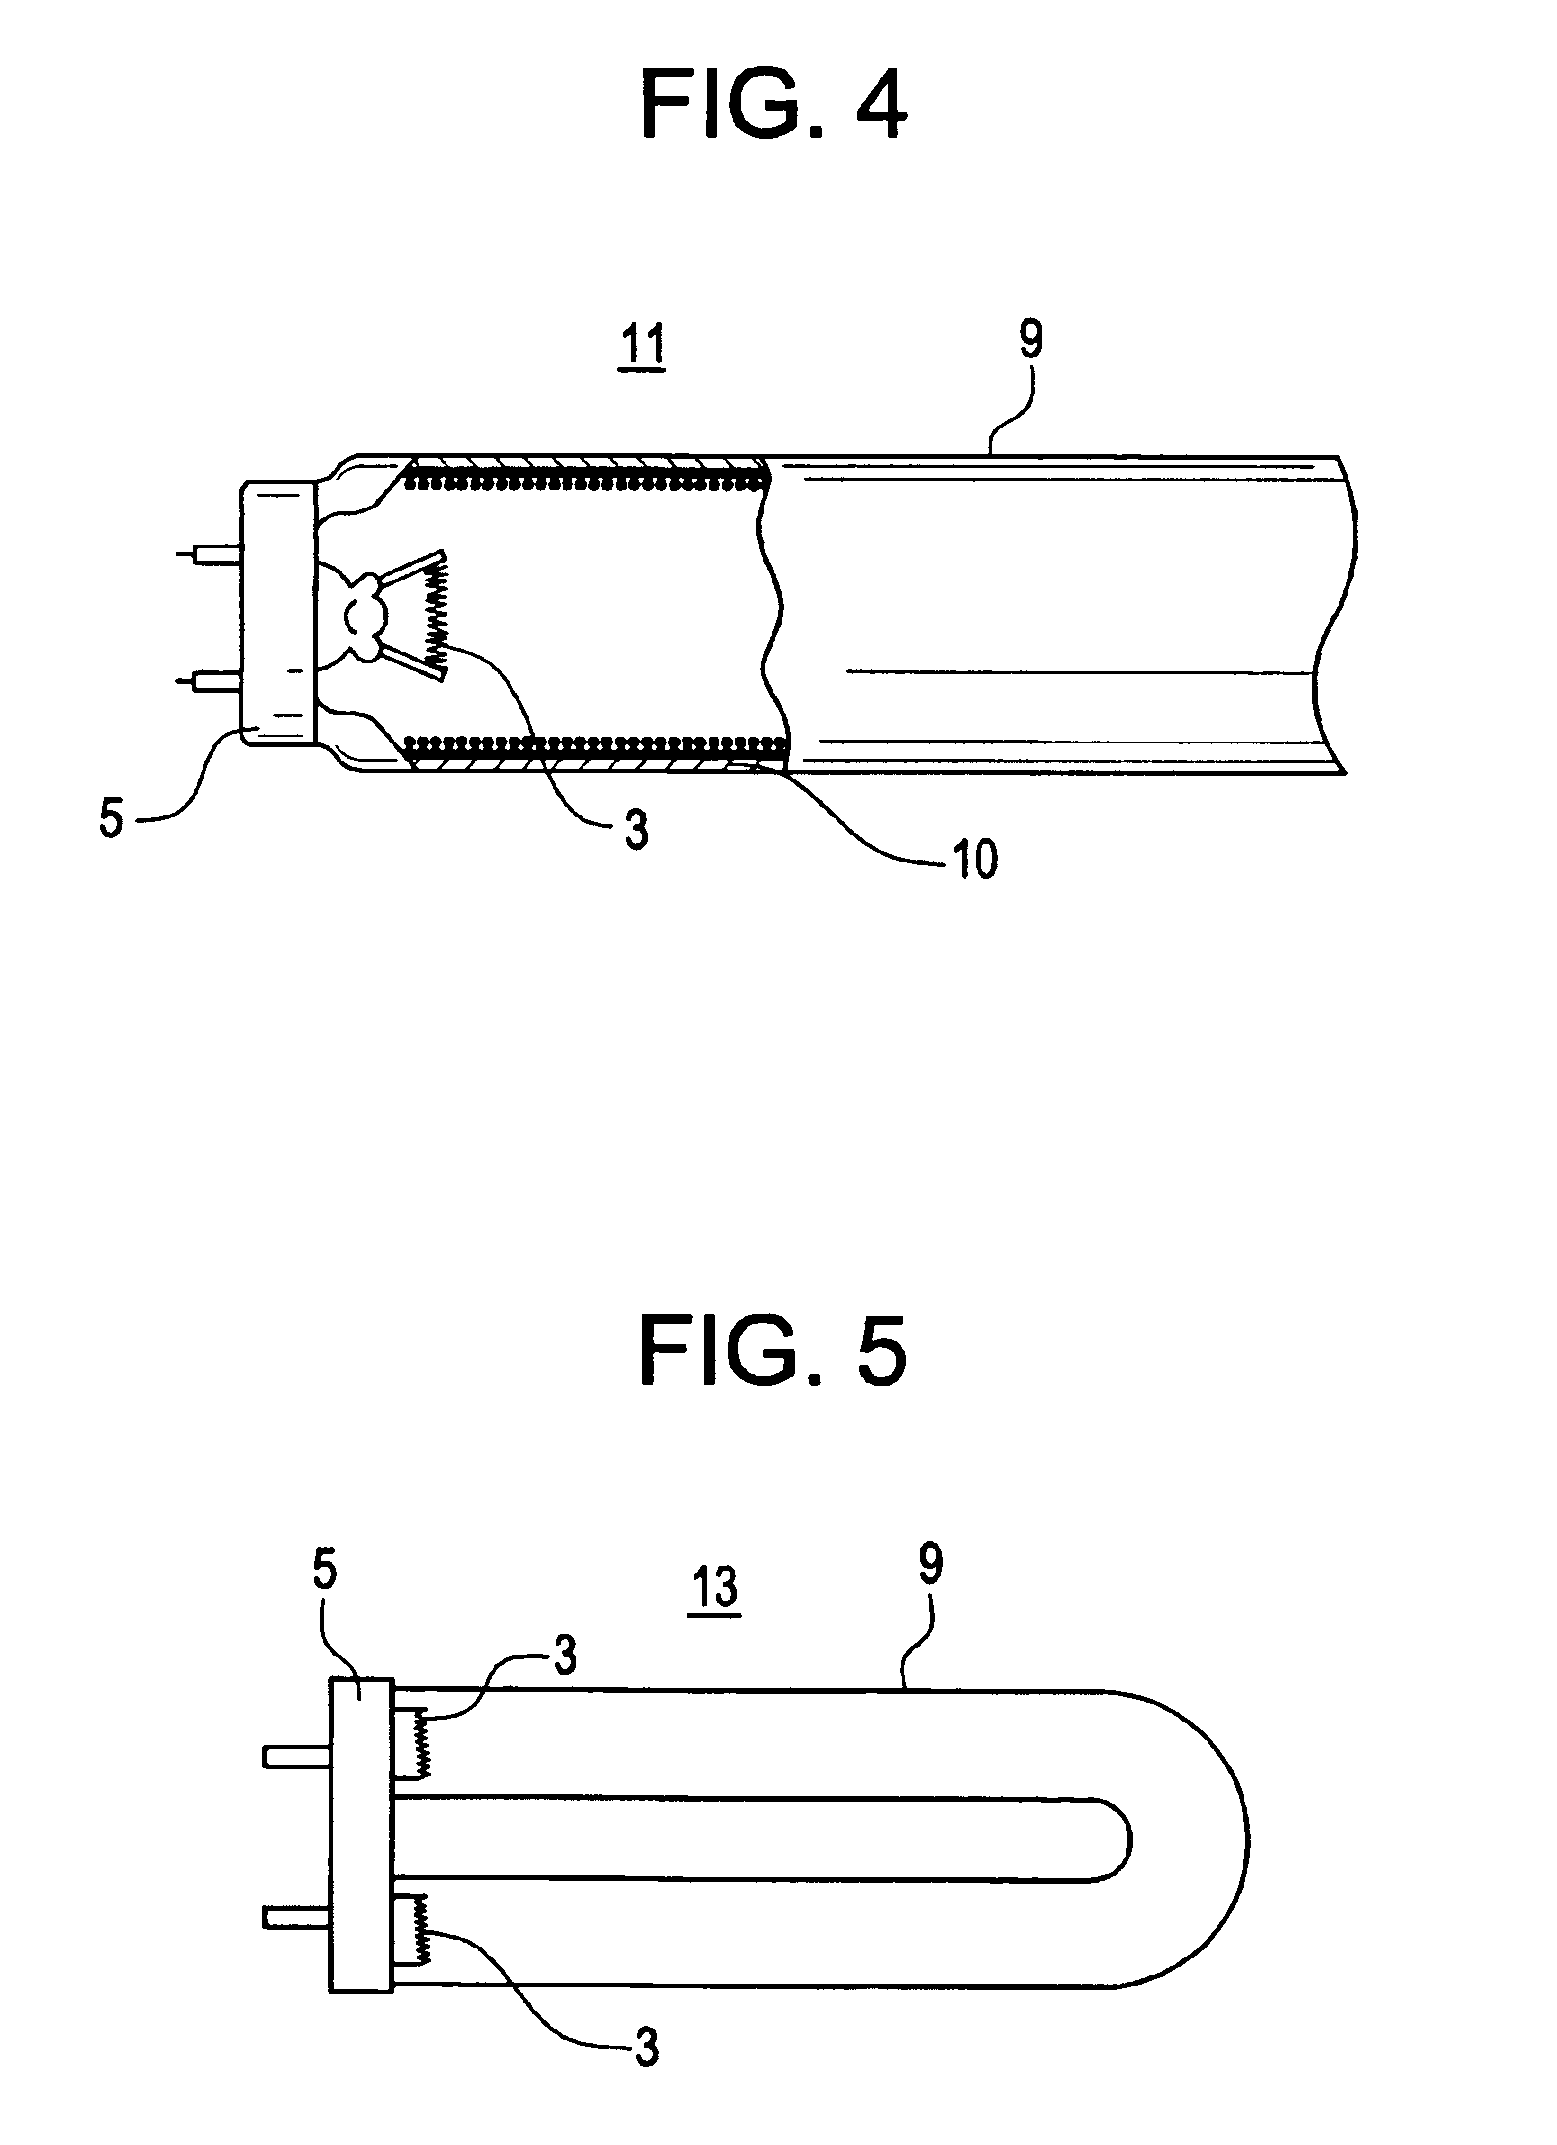 Composite electrode materials for electric lamps and methods of manufacture thereof